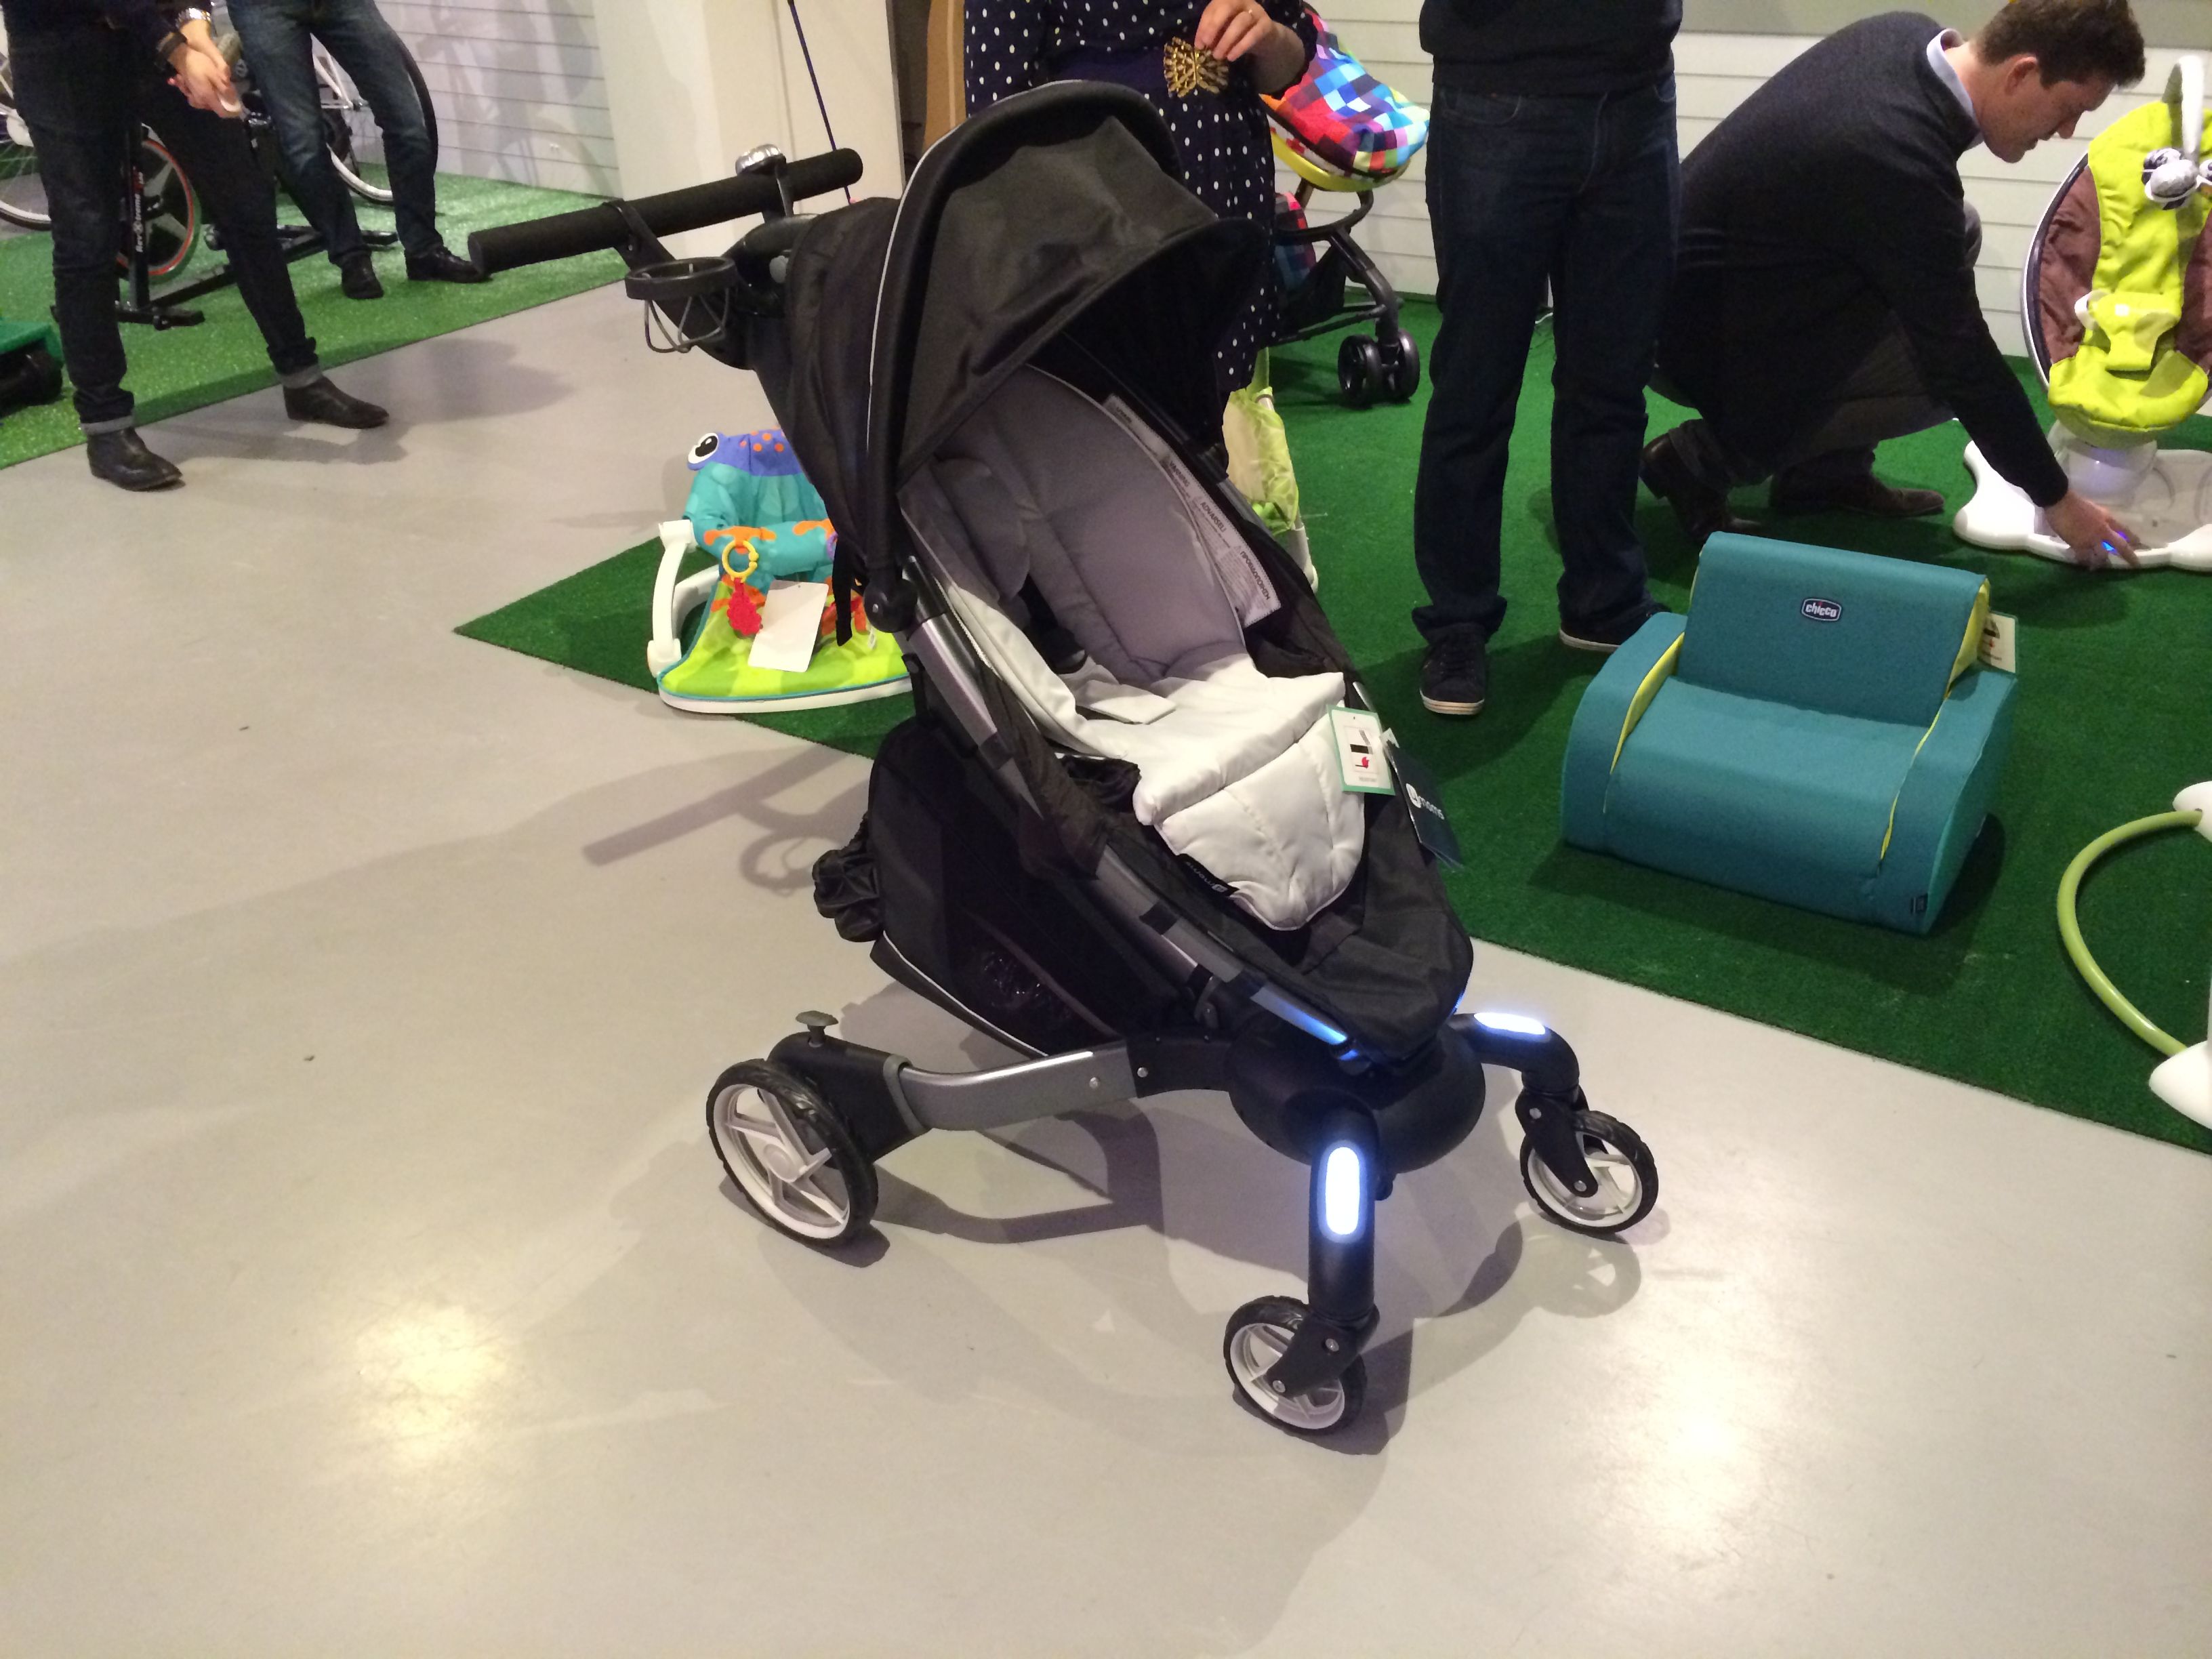 4moms origami baby buggy comes with headlights trip counter and more video  image 1